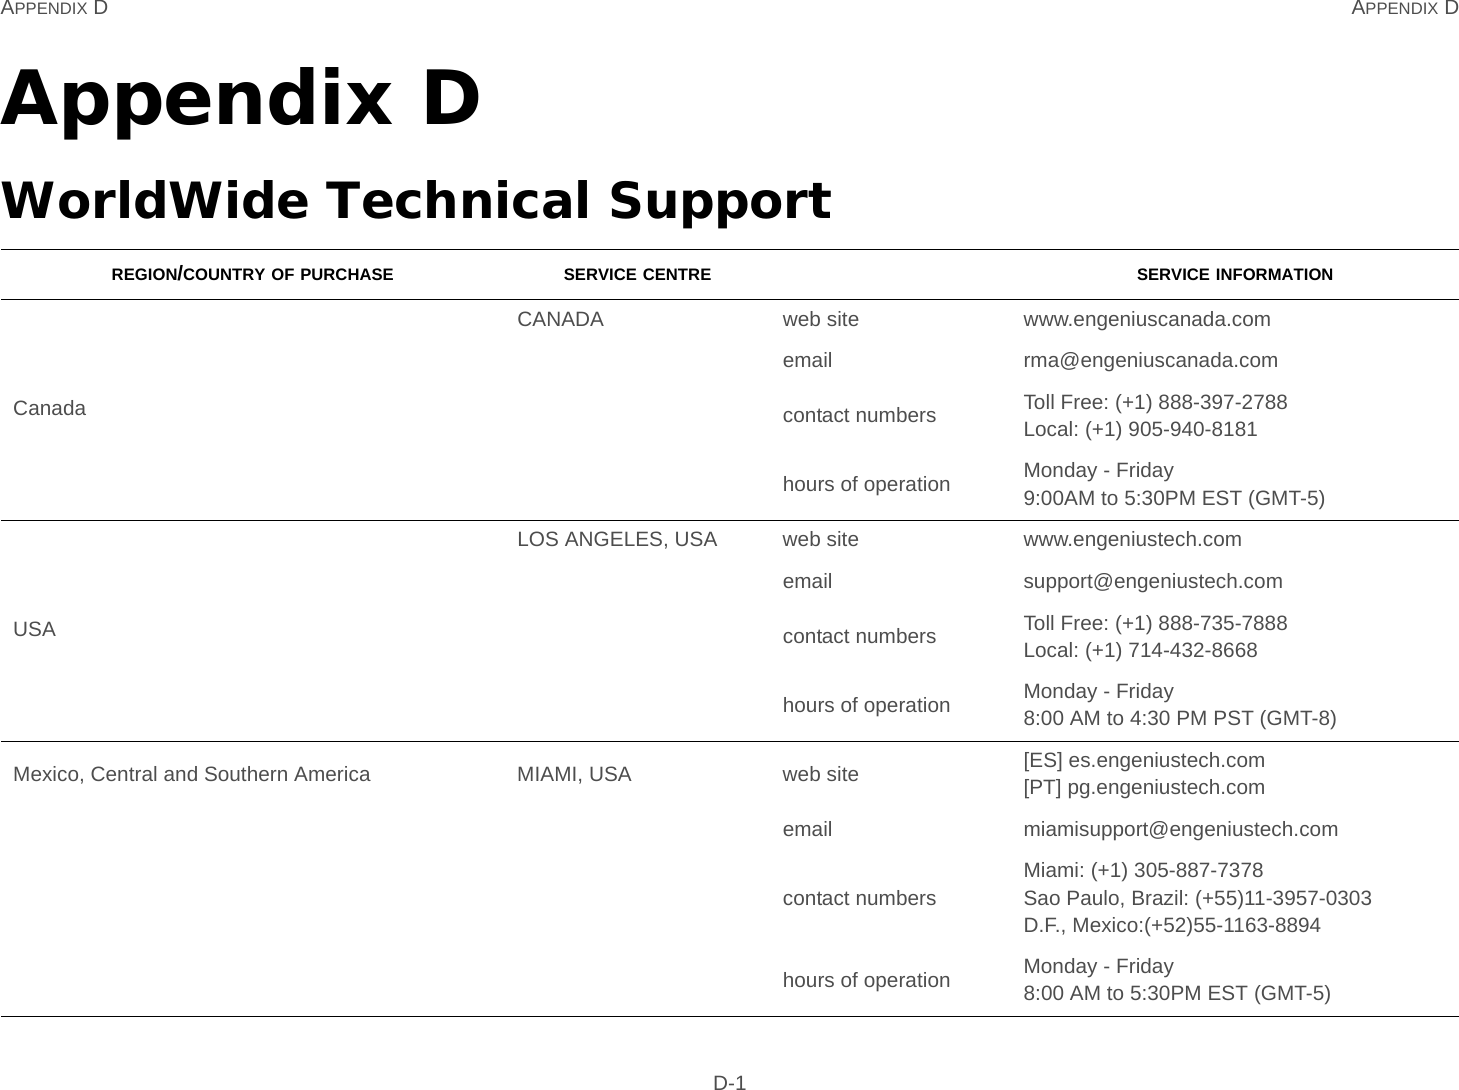 APPENDIX D APPENDIX D D-1Appendix DWorldWide Technical SupportREGION/COUNTRY OF PURCHASE SERVICE CENTRE SERVICE INFORMATIONCanadaCANADA web site www.engeniuscanada.comemail rma@engeniuscanada.comcontact numbers Toll Free: (+1) 888-397-2788Local: (+1) 905-940-8181hours of operation Monday - Friday9:00AM to 5:30PM EST (GMT-5)USALOS ANGELES, USA web site www.engeniustech.comemail support@engeniustech.comcontact numbers Toll Free: (+1) 888-735-7888Local: (+1) 714-432-8668hours of operation Monday - Friday8:00 AM to 4:30 PM PST (GMT-8)Mexico, Central and Southern America MIAMI, USA web site [ES] es.engeniustech.com[PT] pg.engeniustech.comemail miamisupport@engeniustech.comcontact numbersMiami: (+1) 305-887-7378Sao Paulo, Brazil: (+55)11-3957-0303D.F., Mexico:(+52)55-1163-8894 hours of operation Monday - Friday8:00 AM to 5:30PM EST (GMT-5) 